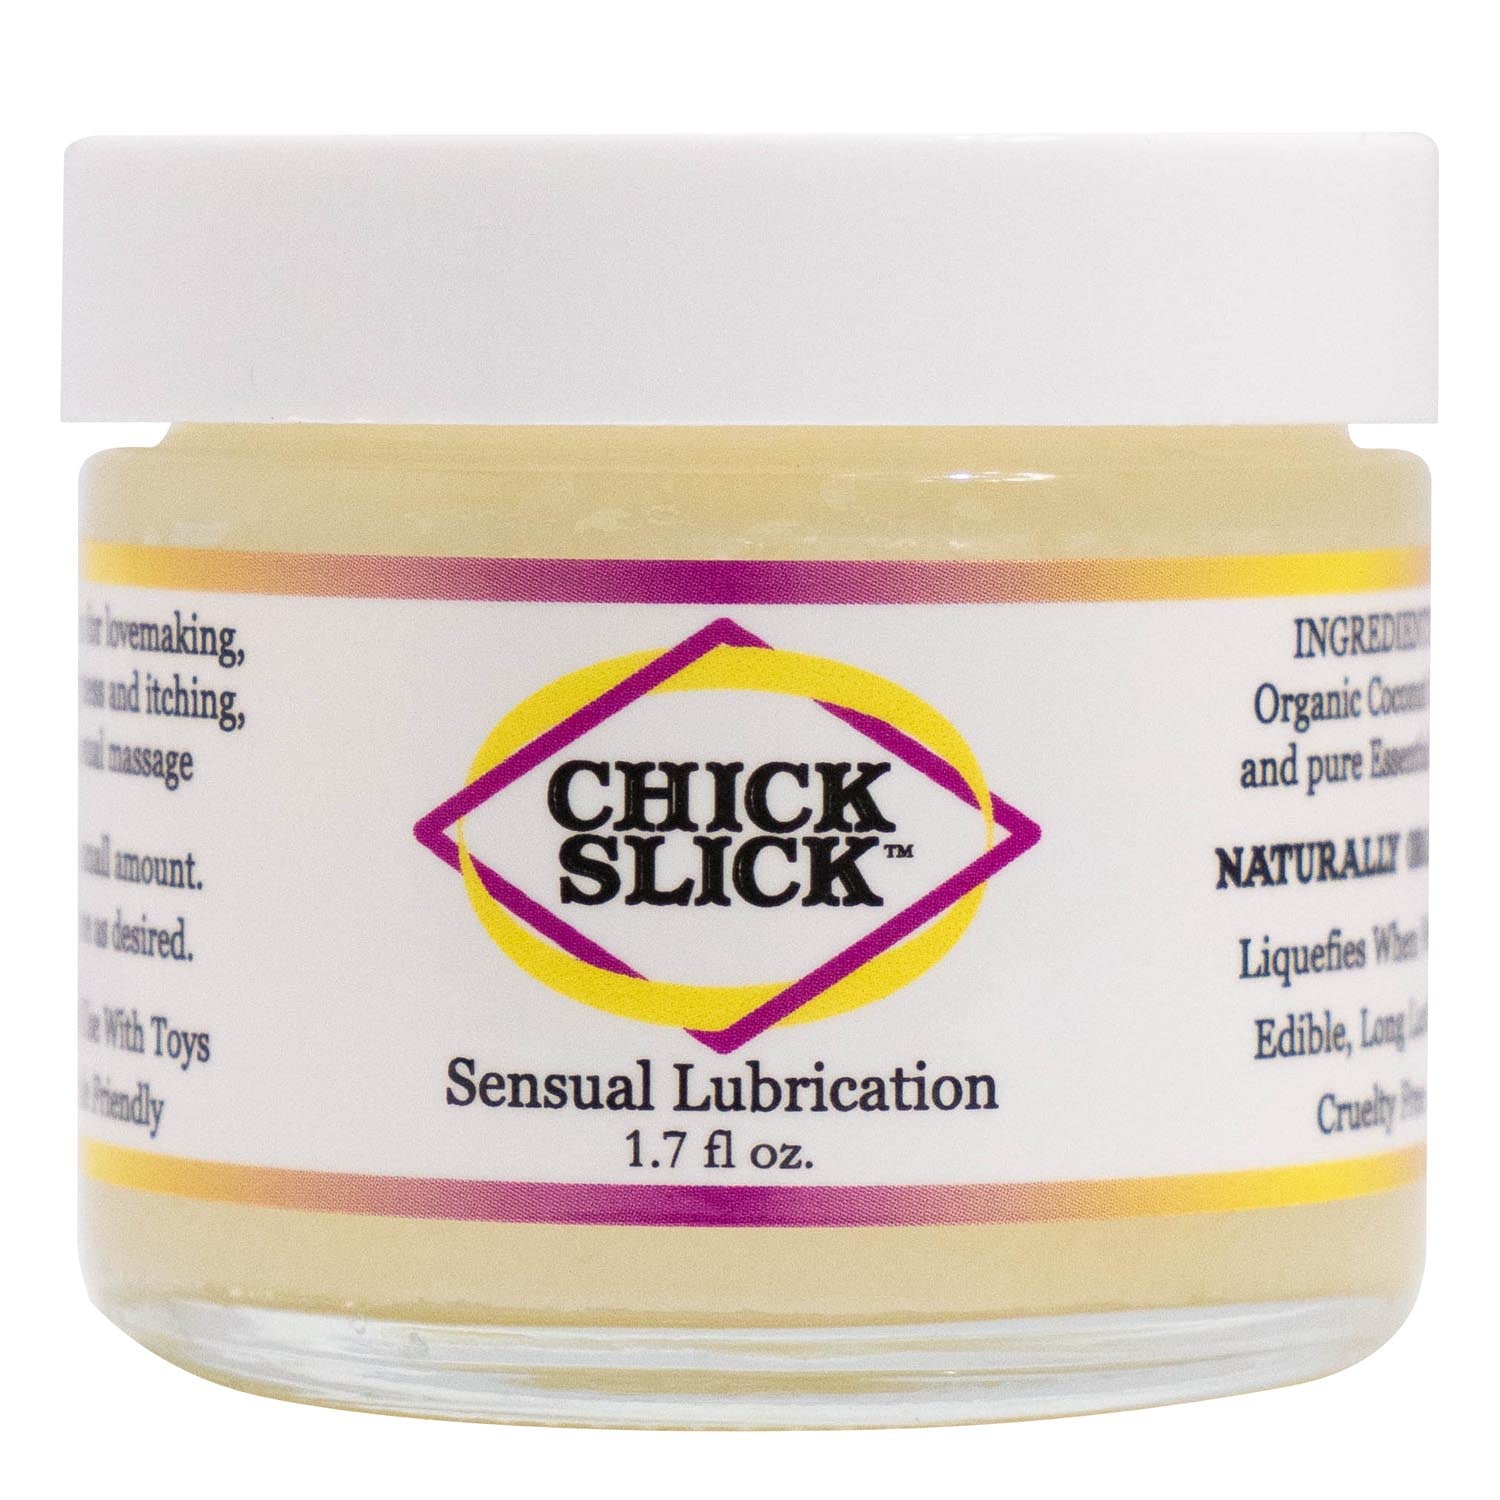 Chick Slick Pleasure Cream 2oz handcrafted by Alise Body Care